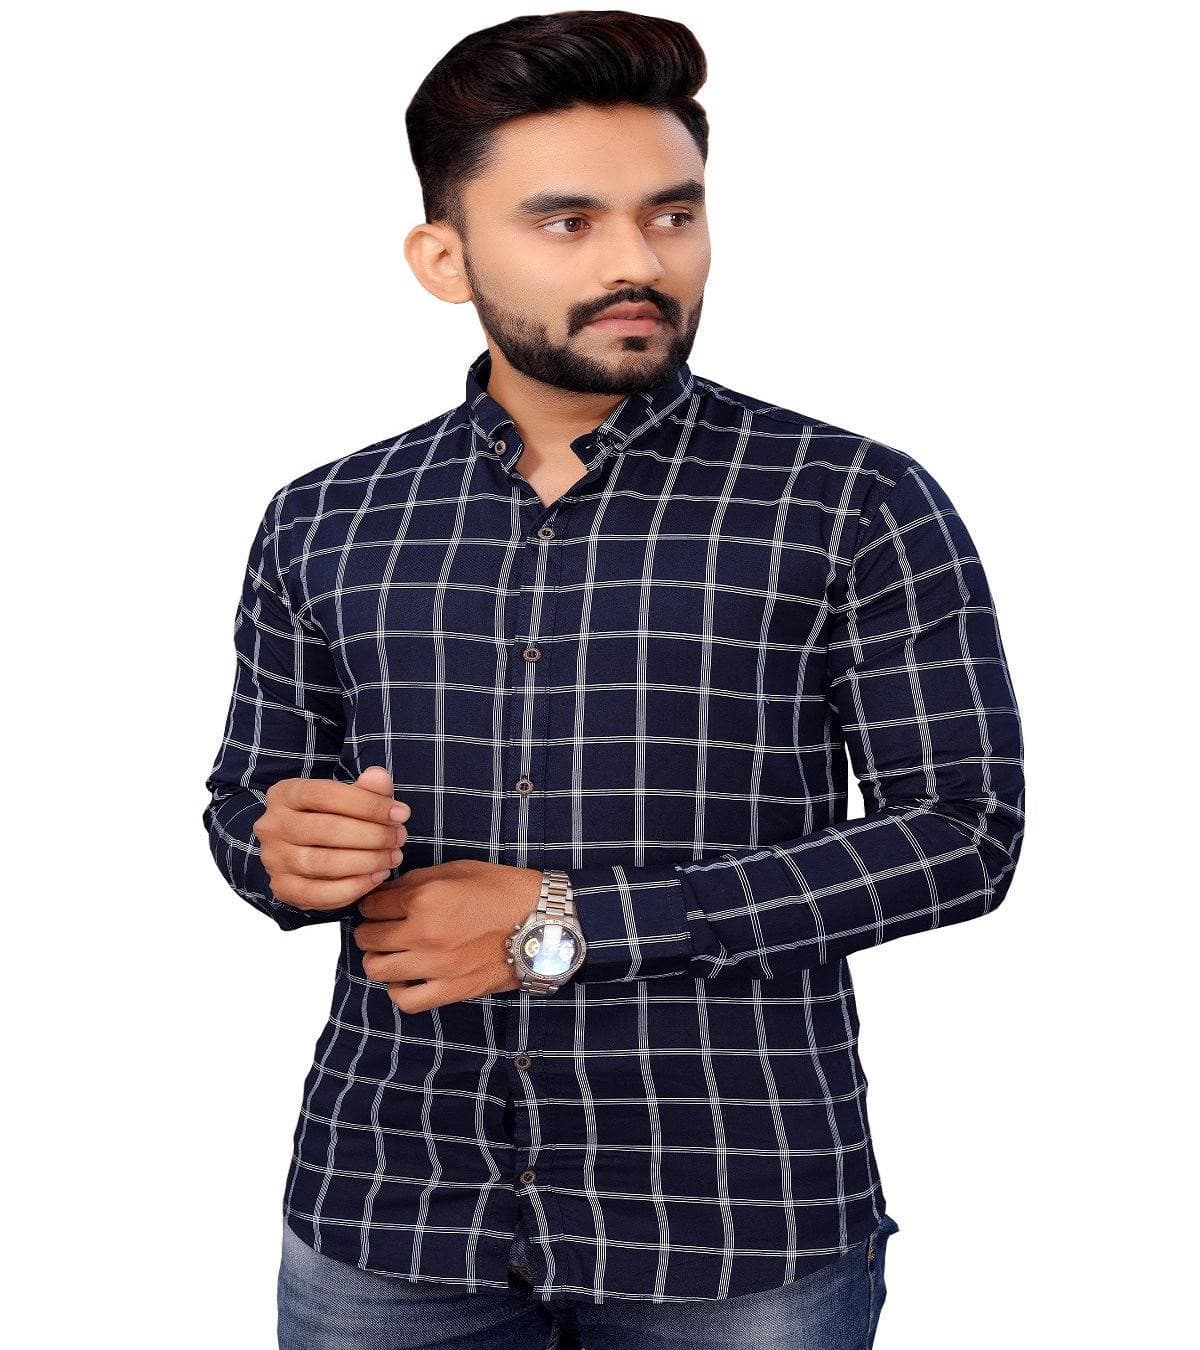 UD FABRIC Men Full Sleeve Cotton Casual Check Shirts - Black - UD FABRIC - Your Style our Design